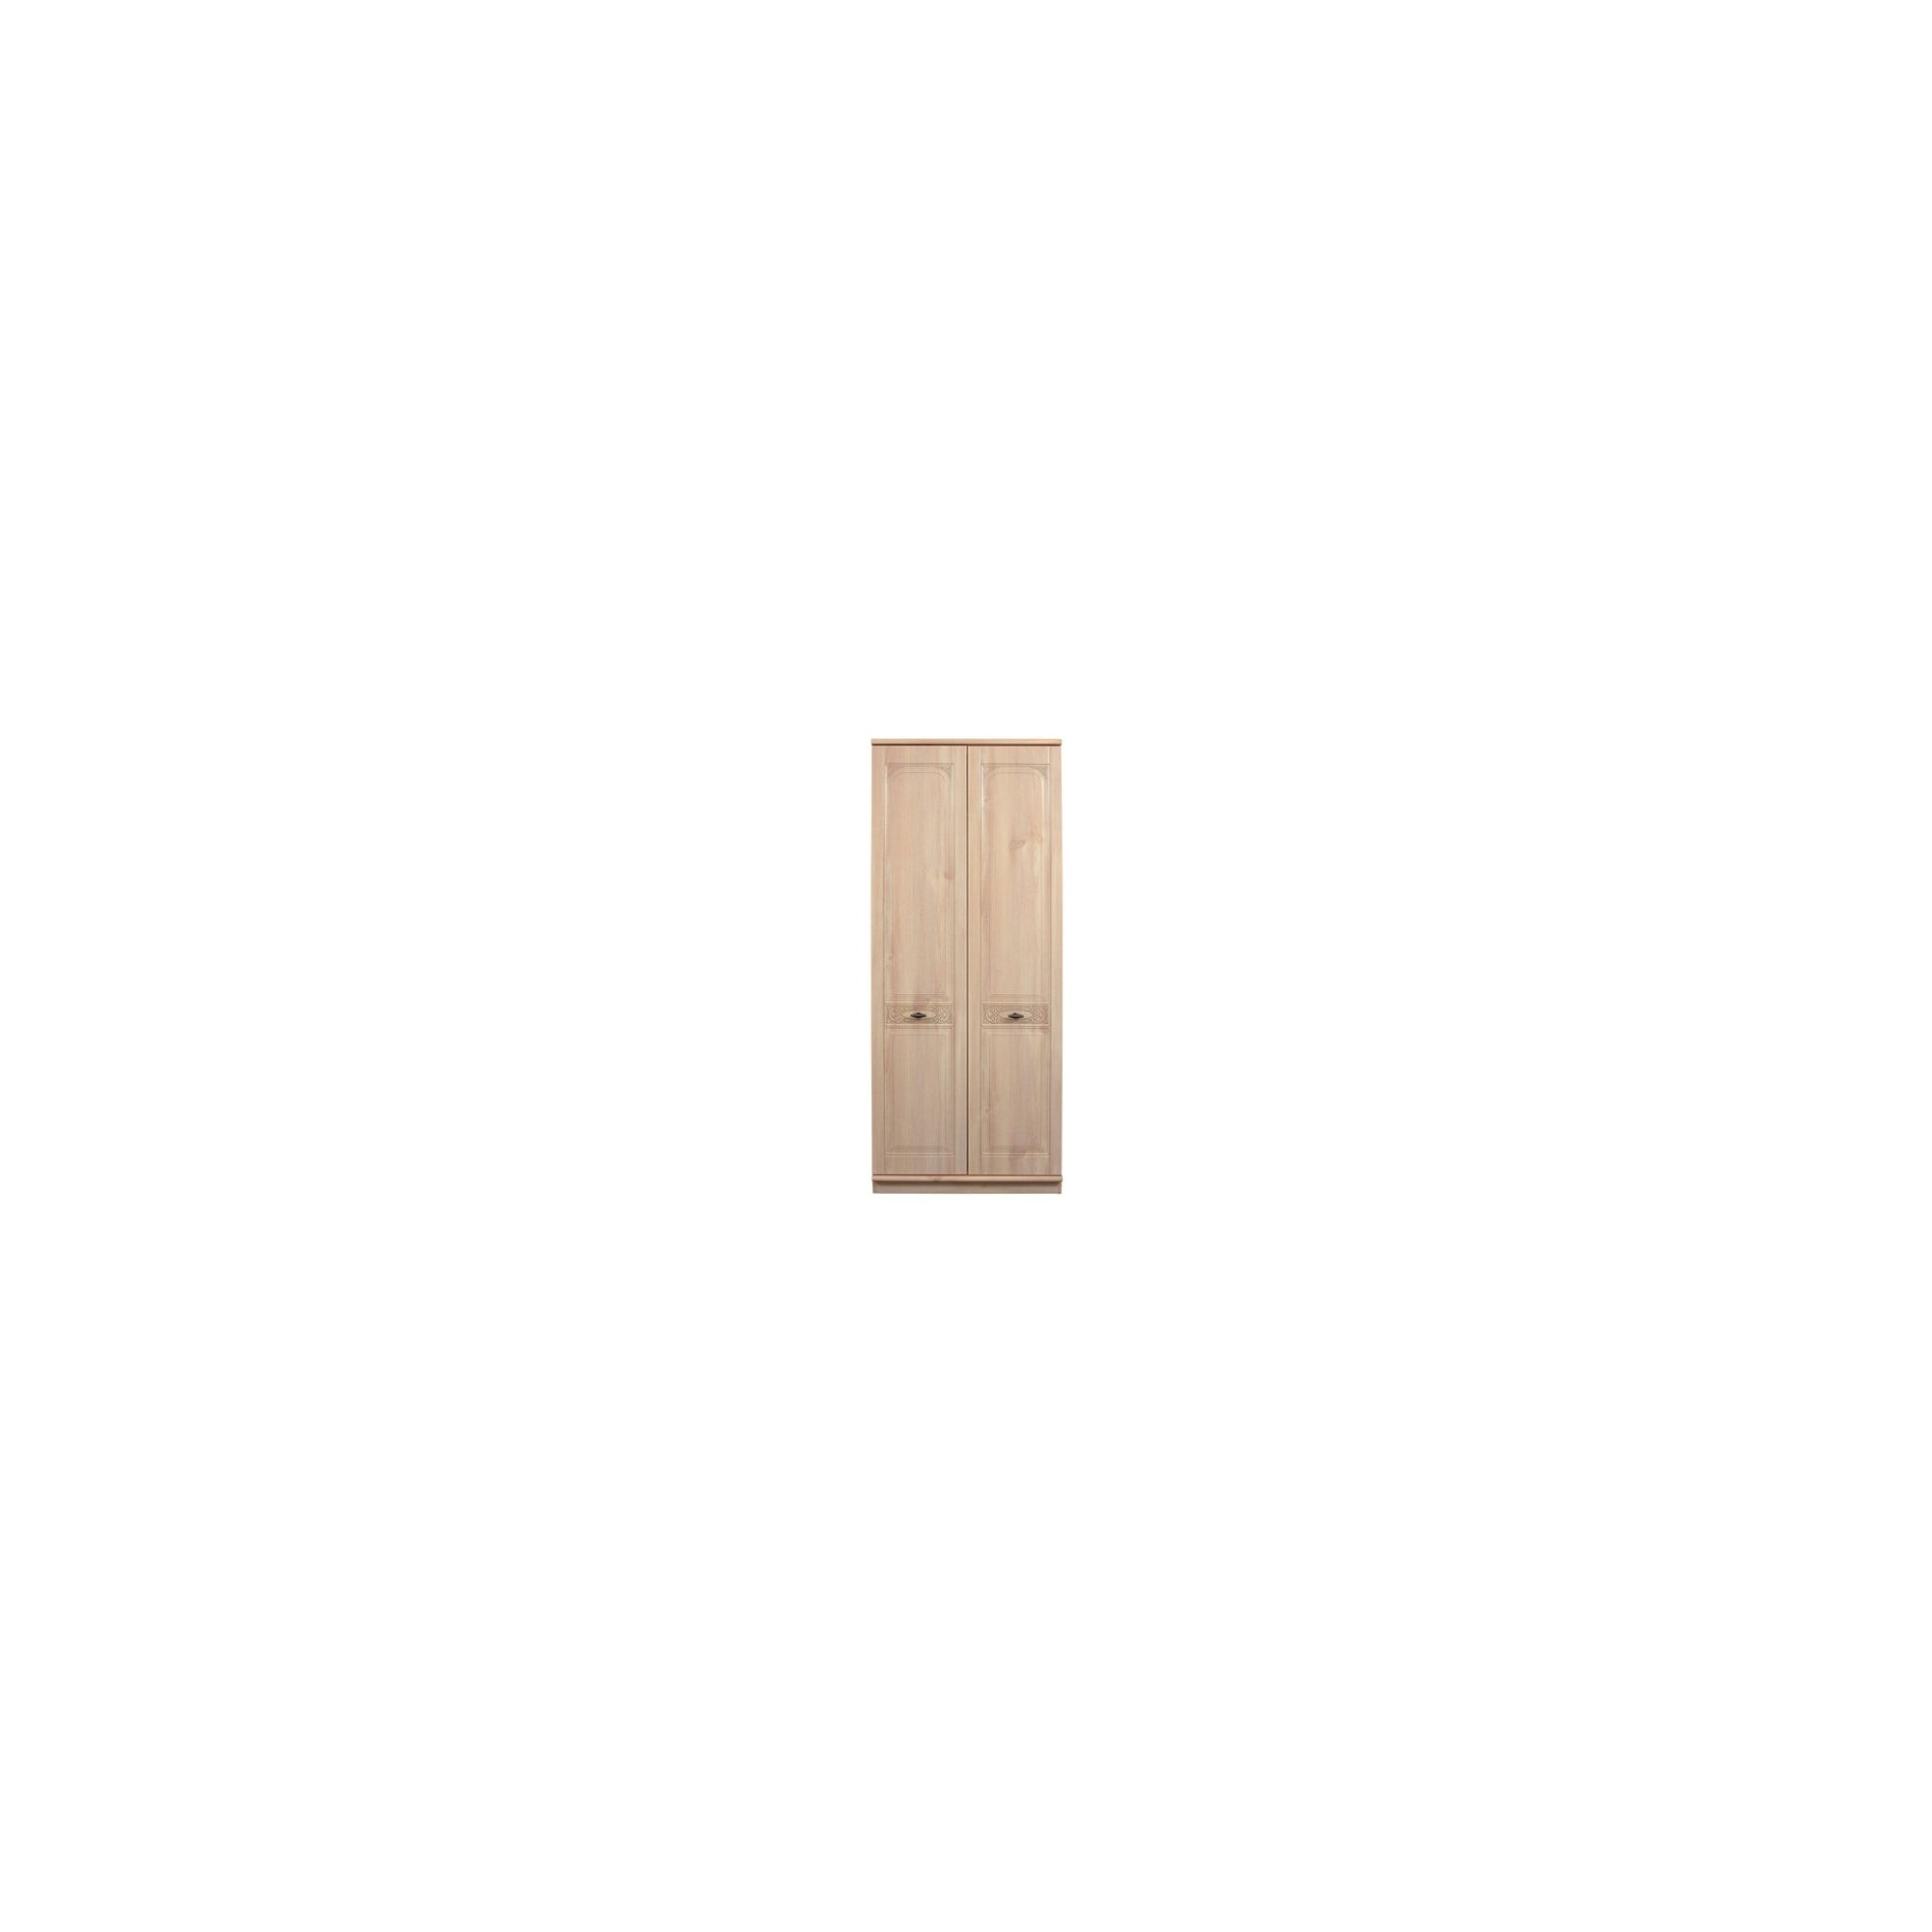 Caxton Florence 2 Door Wardrobe in Washed Oak Effect at Tescos Direct